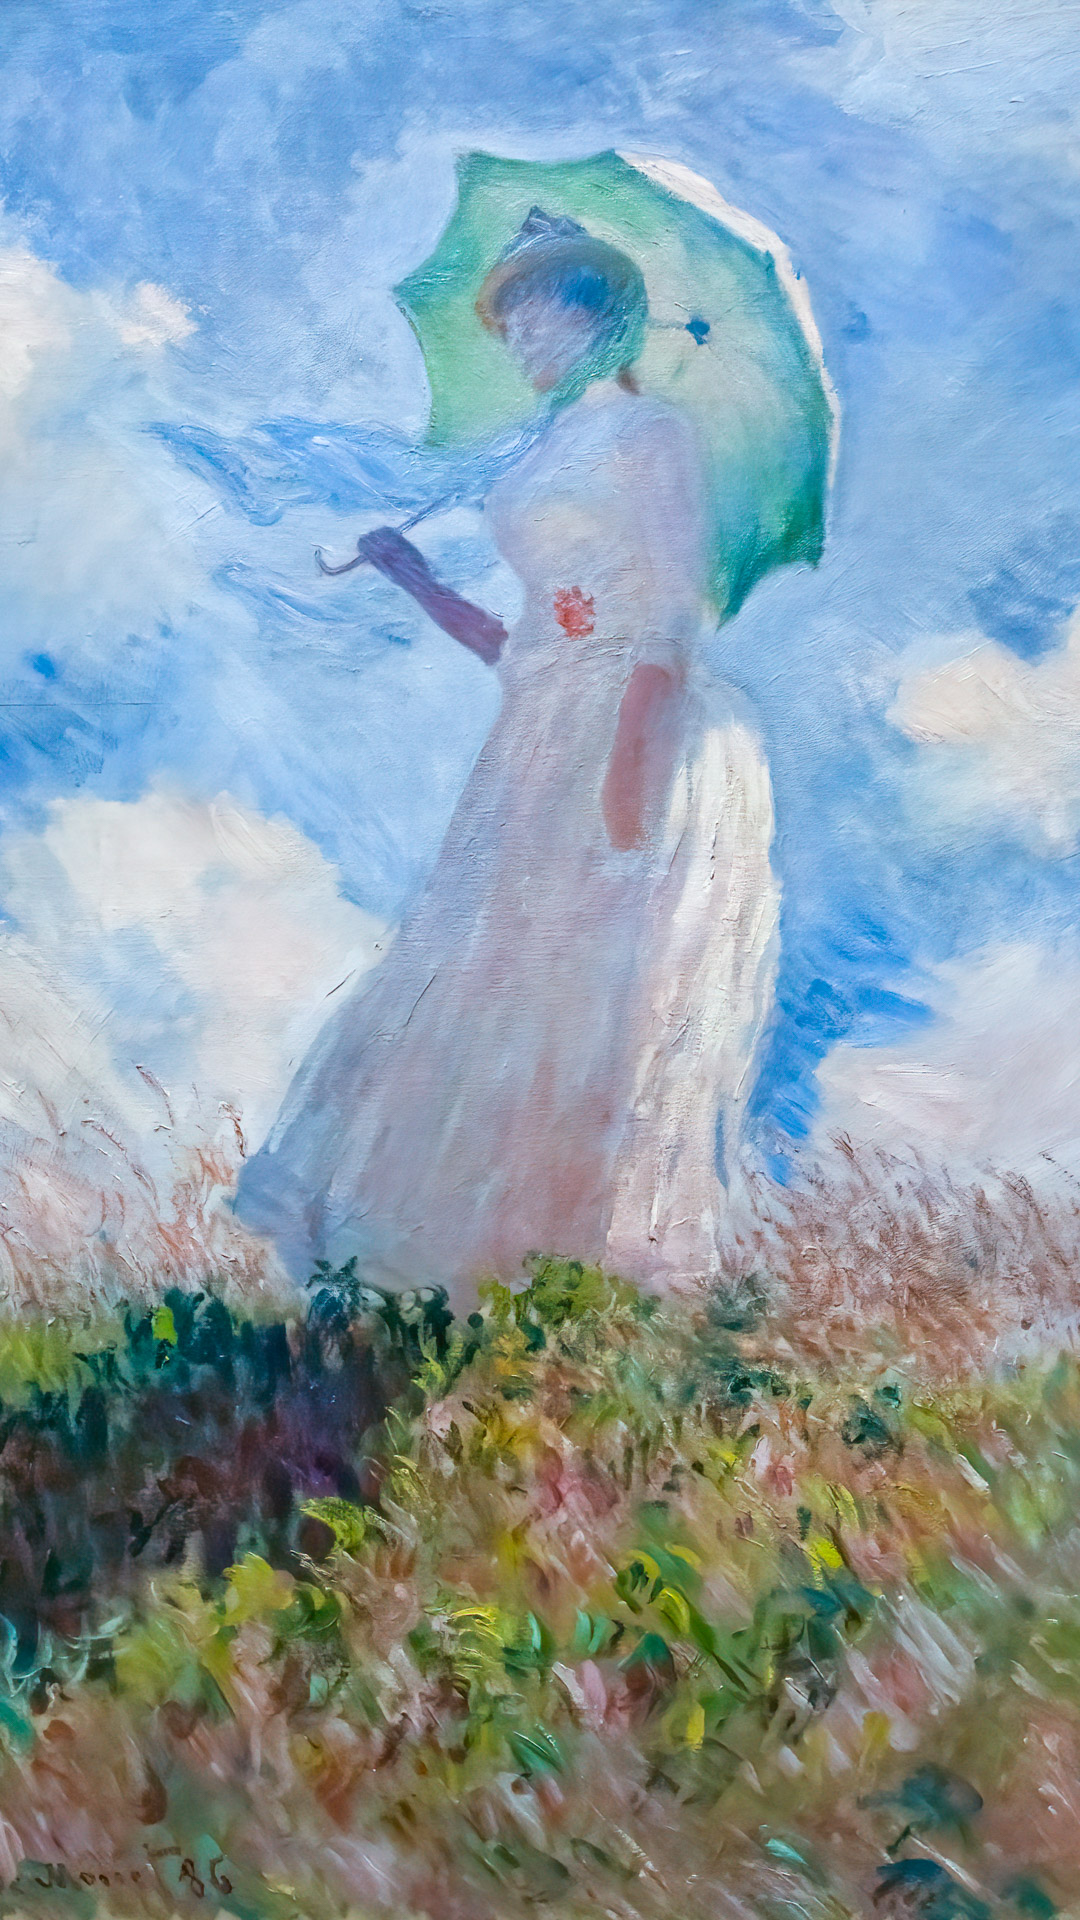 Adorn your iPhone with the classic beauty of Claude Monet's 'Woman with a Parasol' wallpaper.